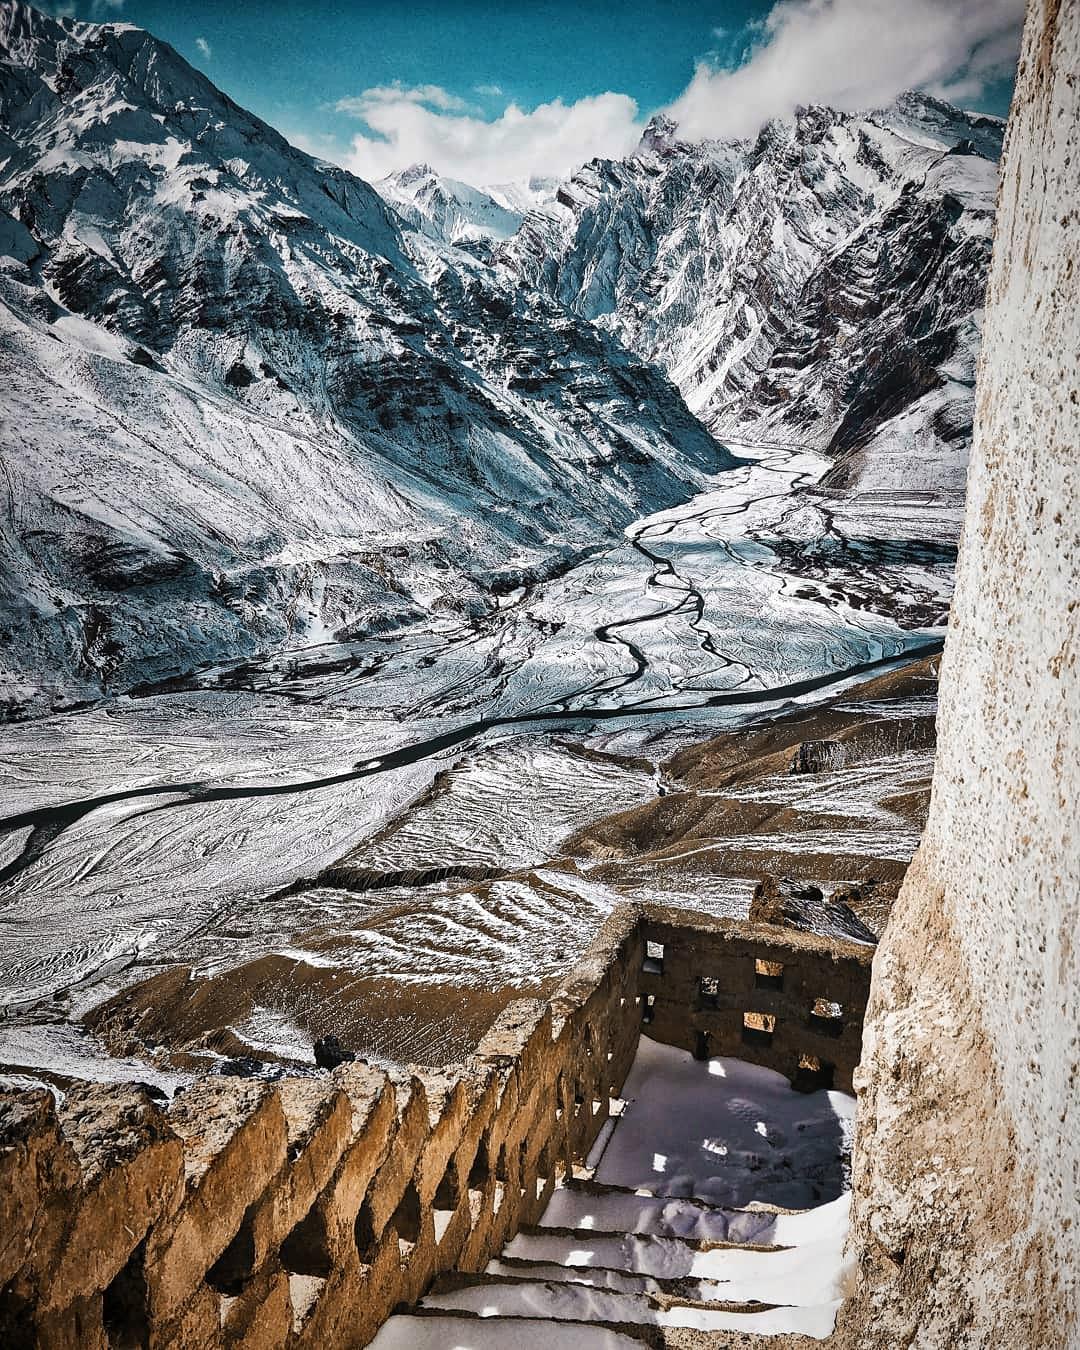 During winter the barren mountains of the Spiti valley get metamorphosed into snowy wonderland. I took this picture while descending from the balcony of Dhankar monastery. Spiti river can be seen meandering below.